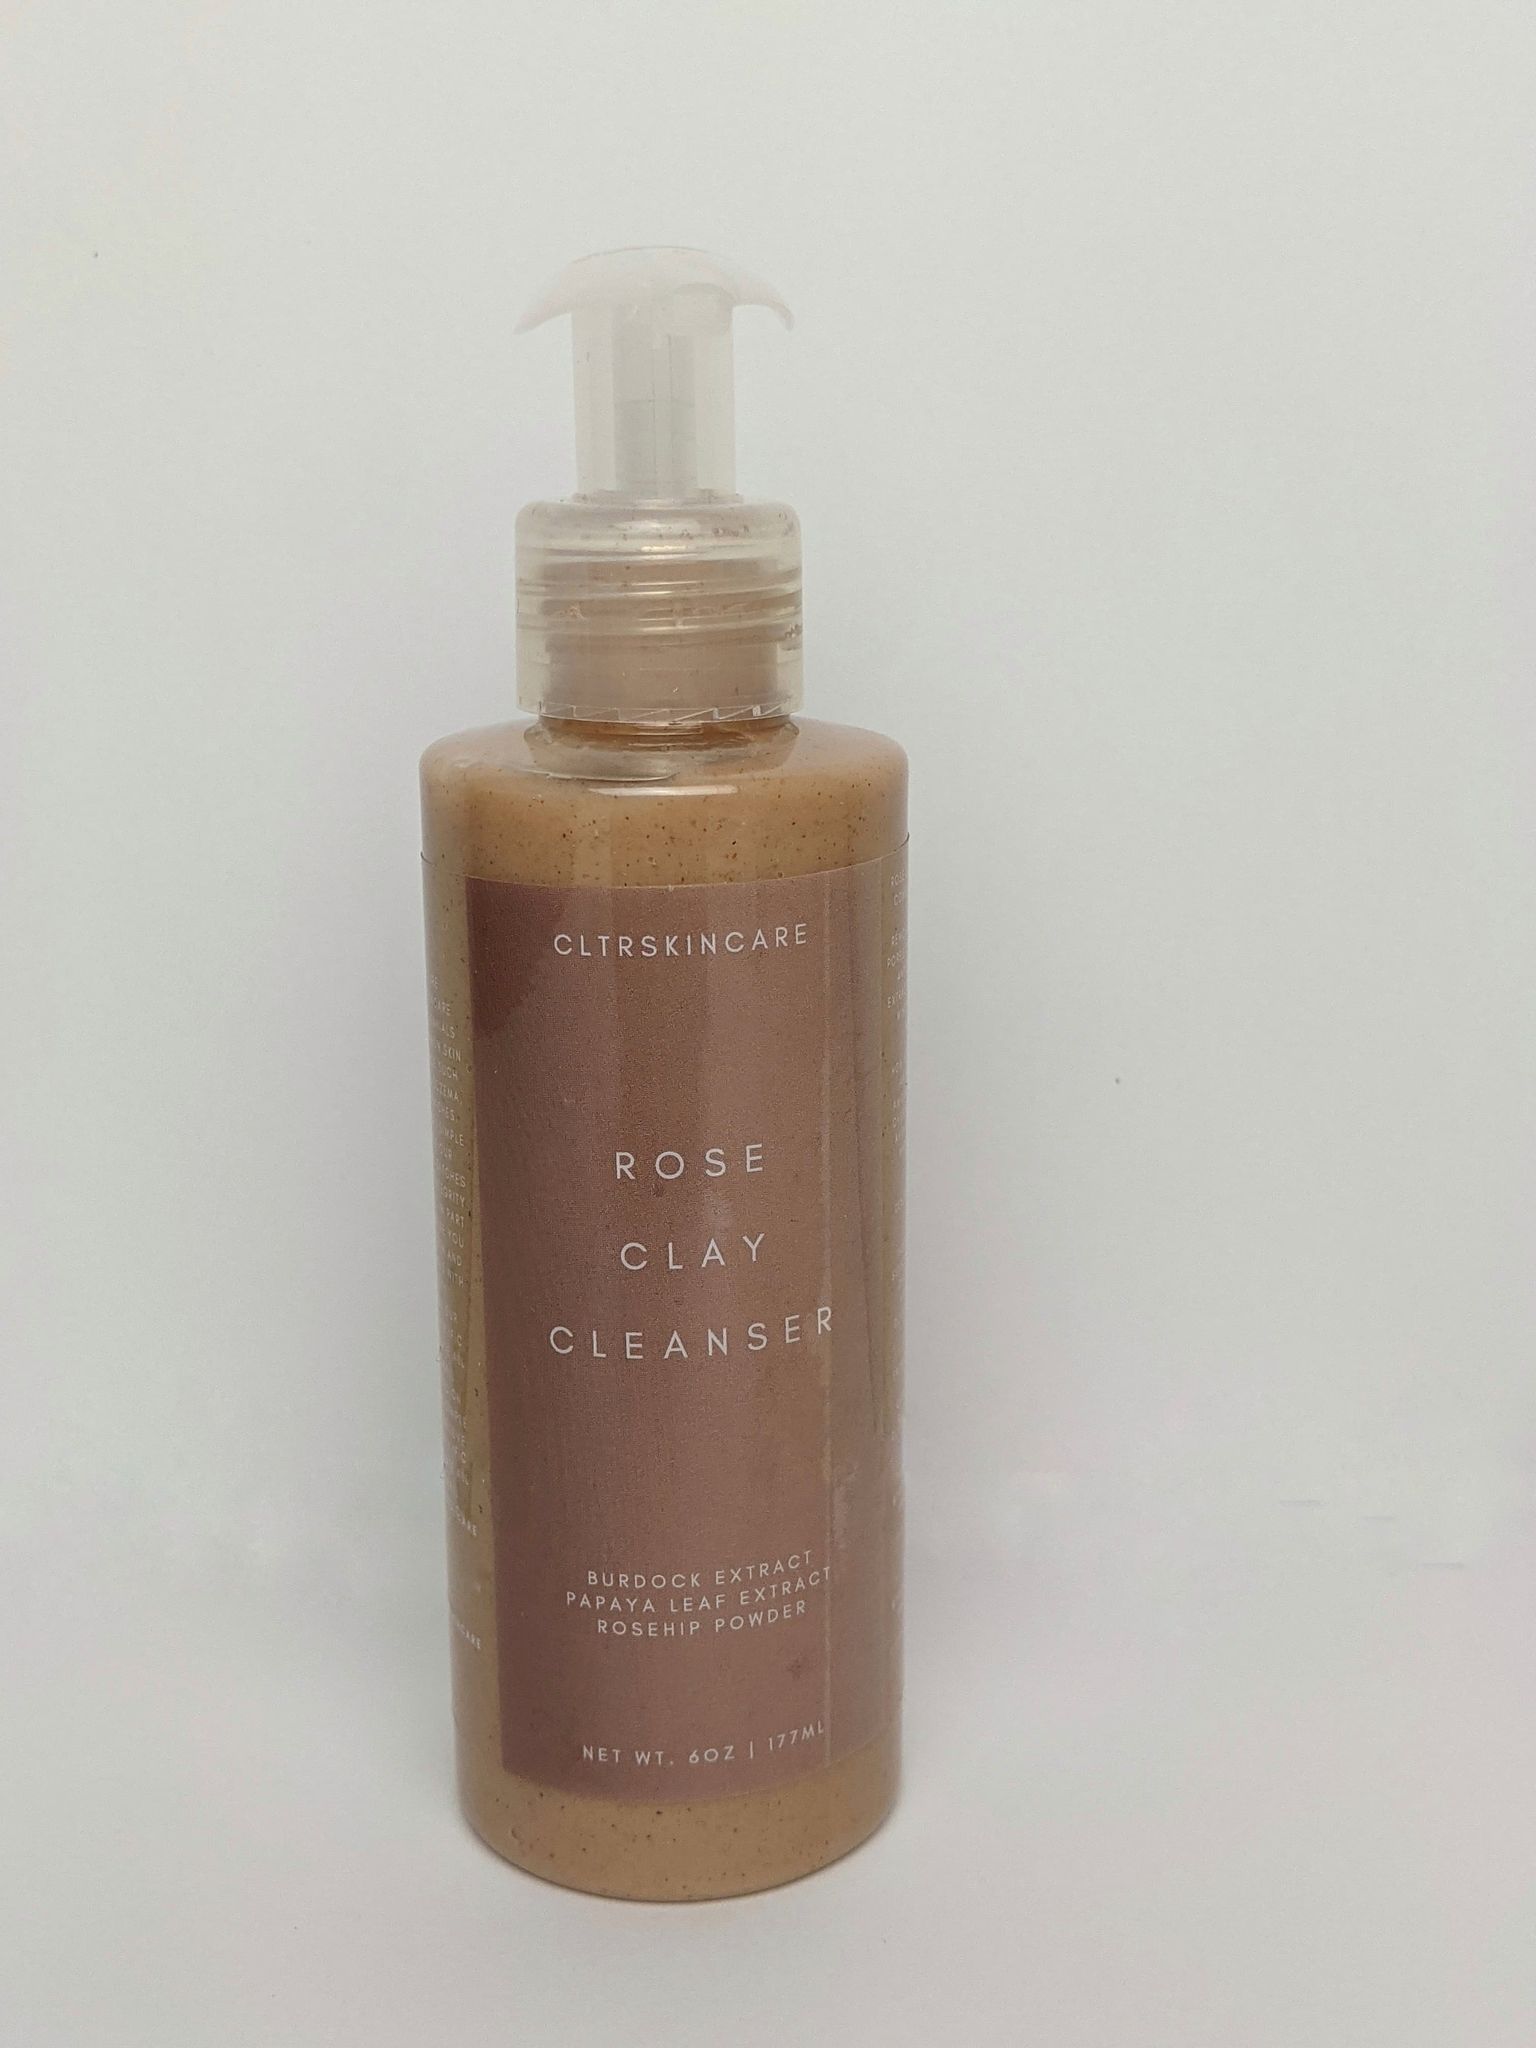 CLTRSkincare - Rose Clay Cleanser